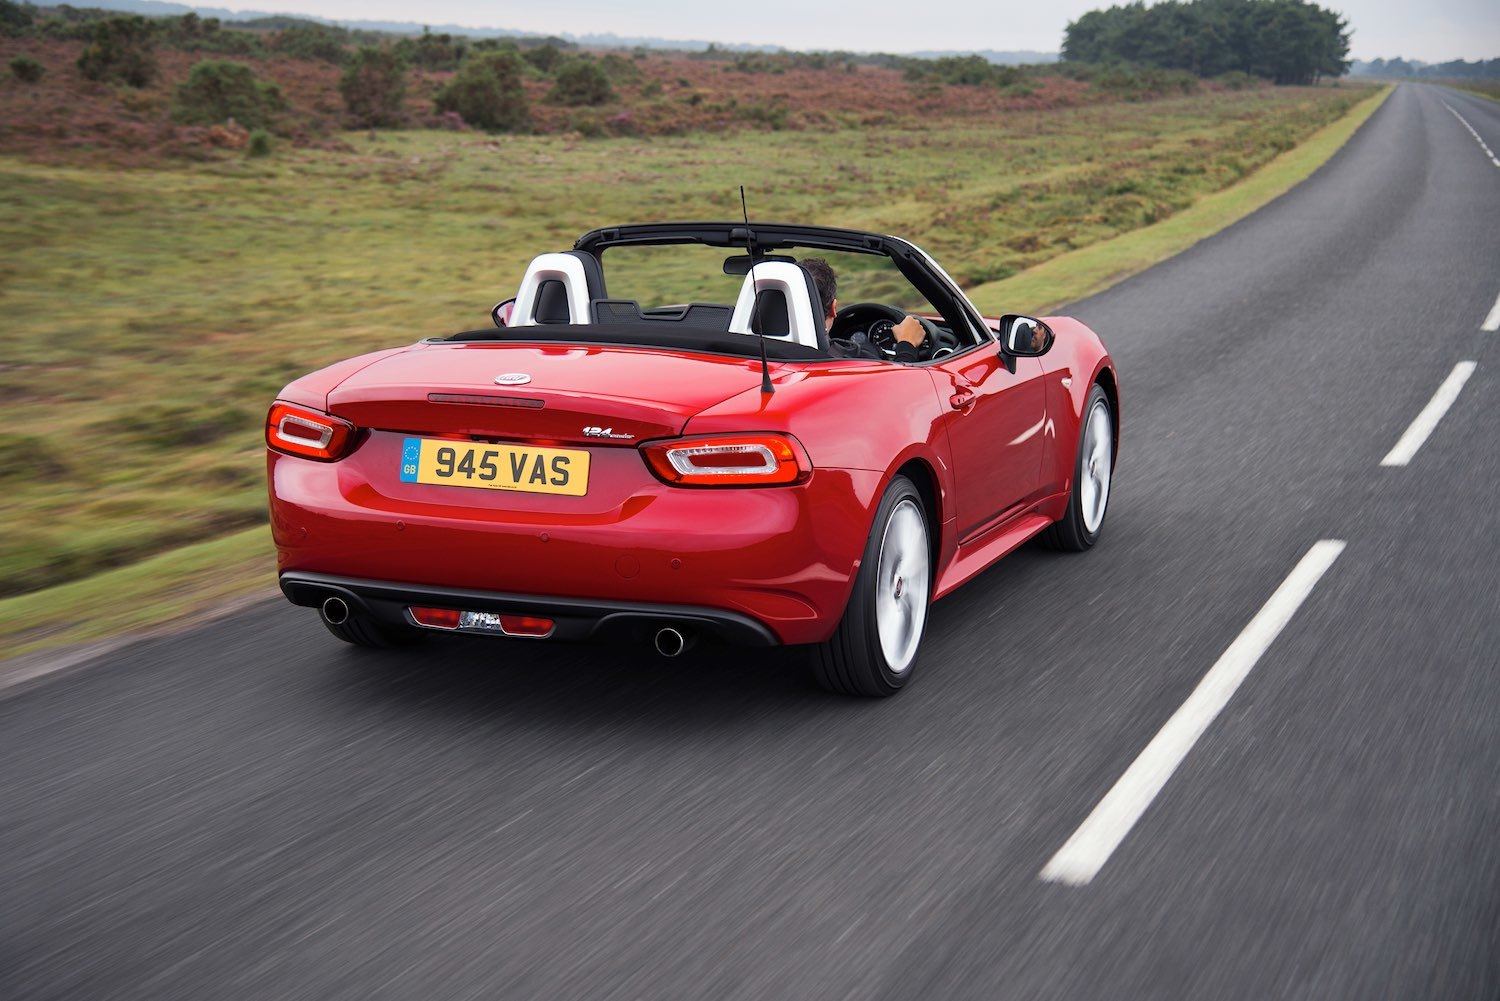 Tom Scanlan reviews the Fiat 124 Spider for Drive 5